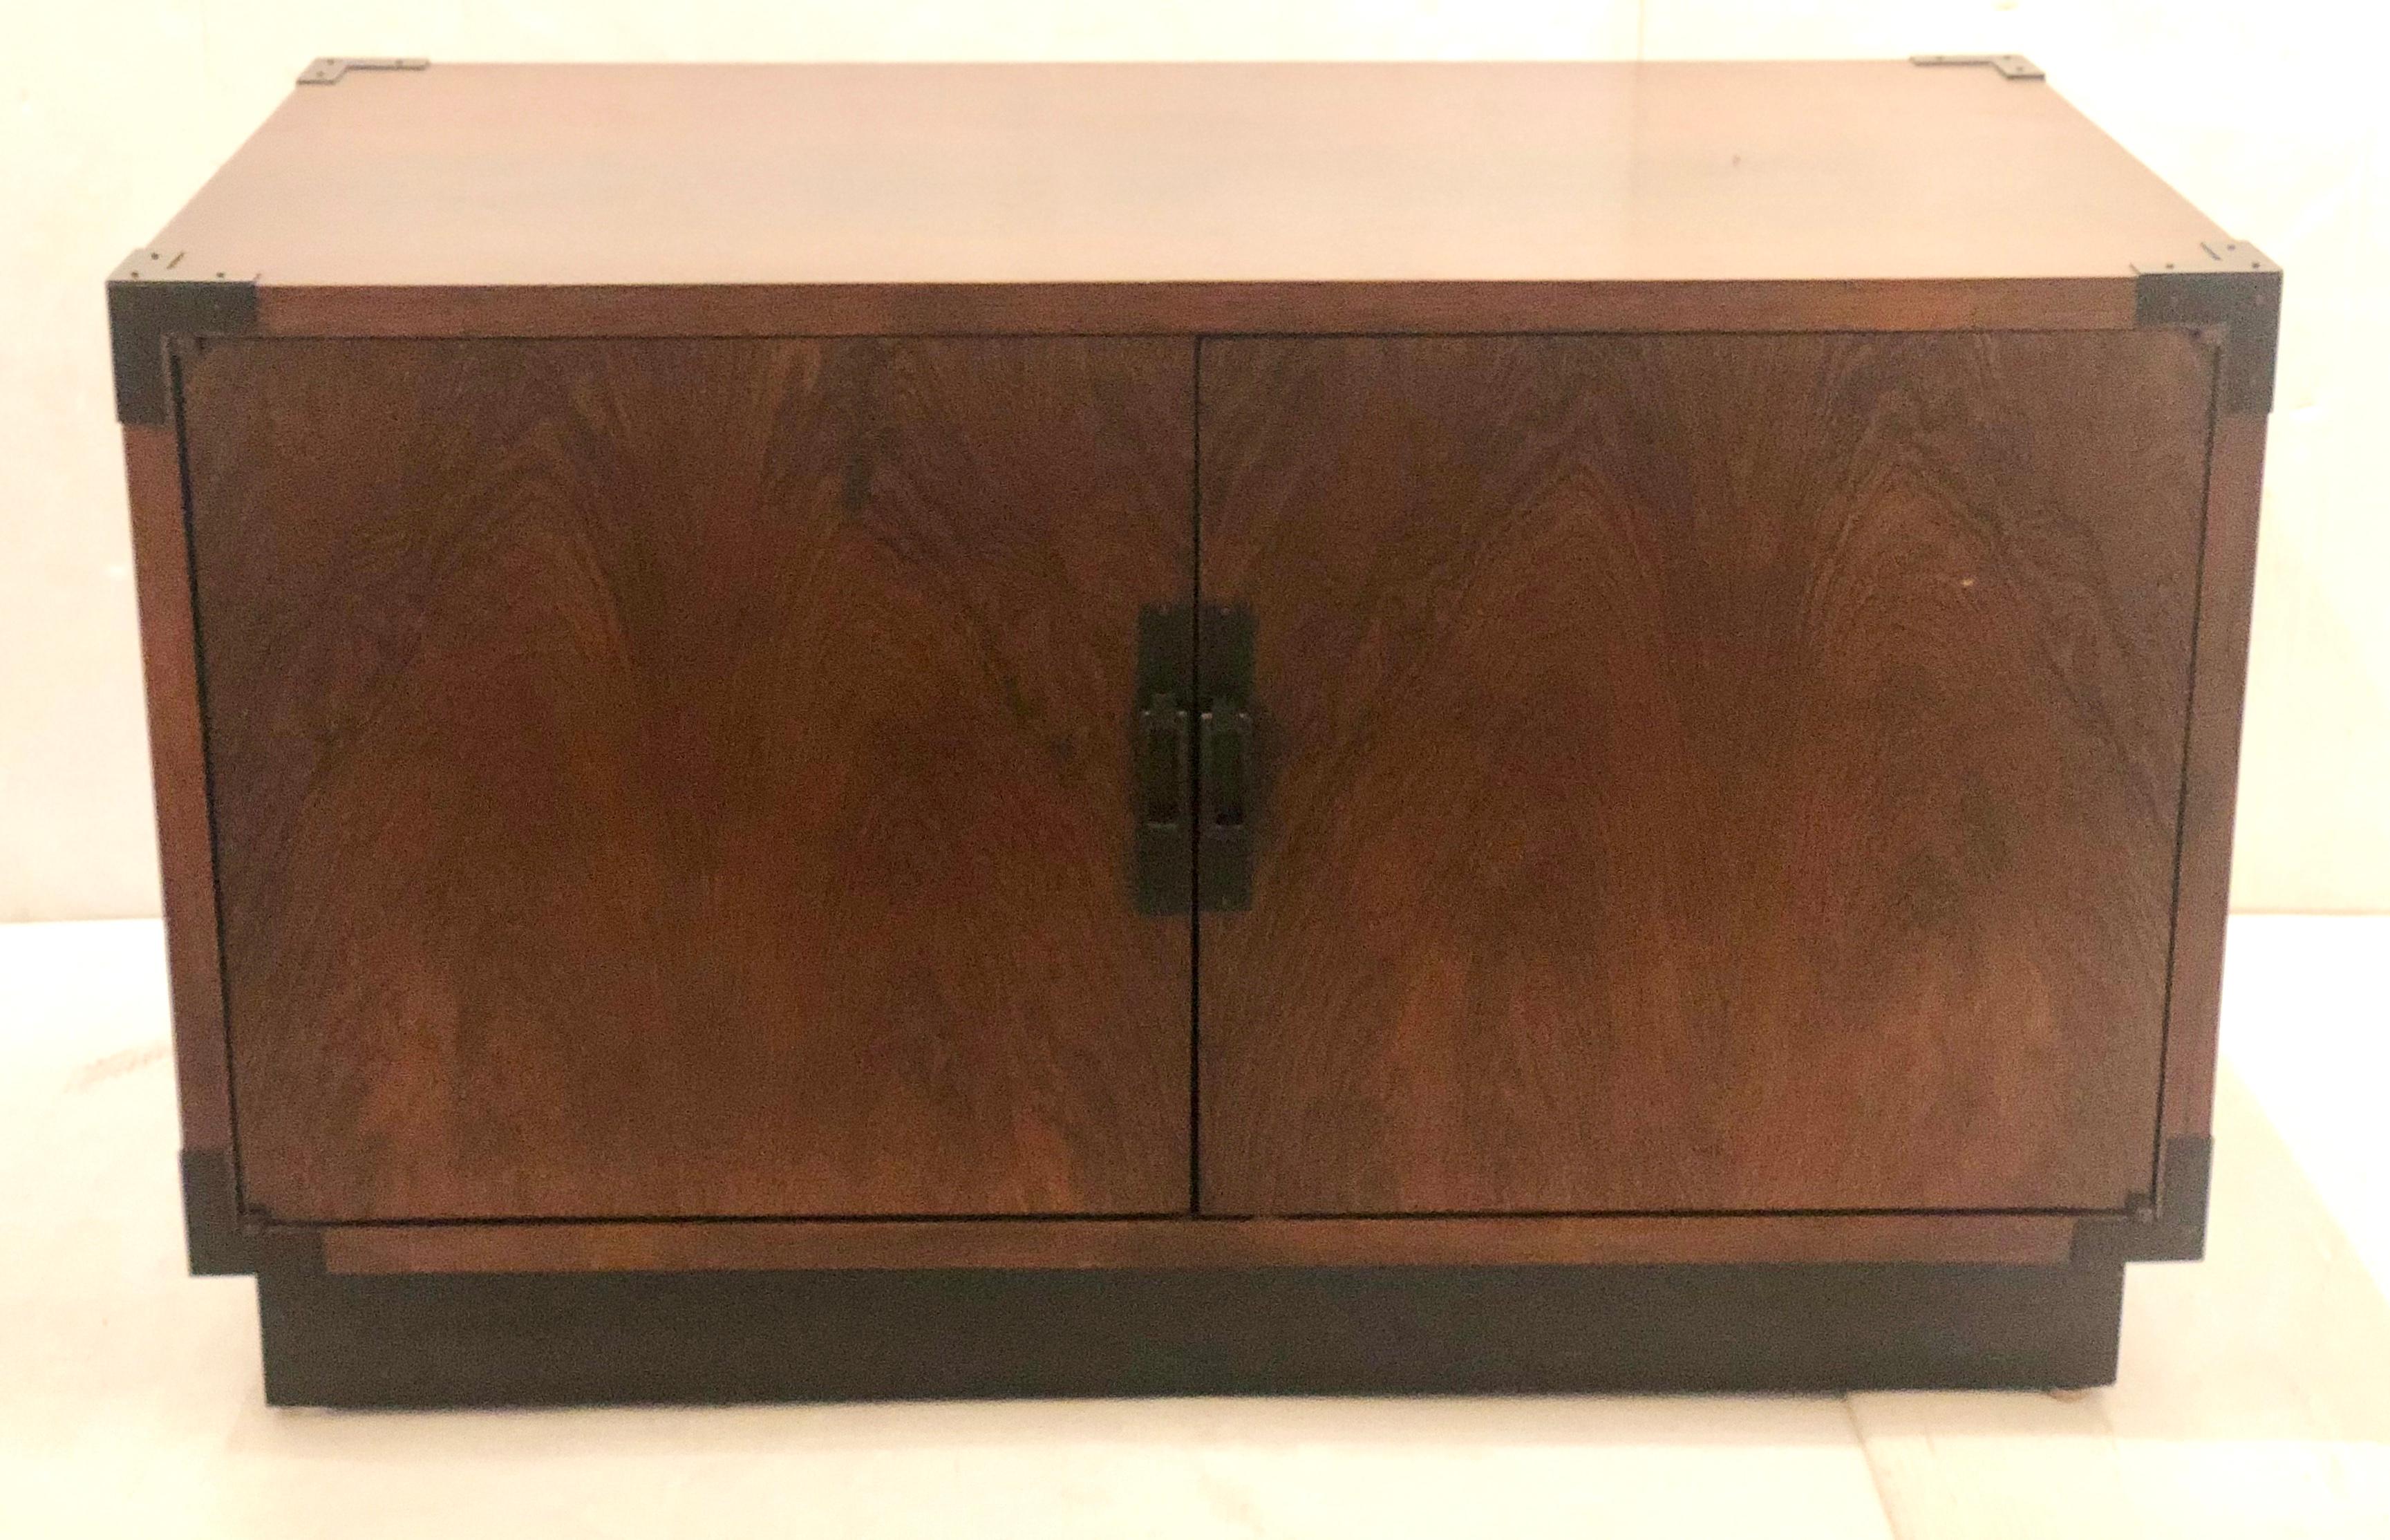 American Pair of Danish Modern Low Rosewood Cabinets with Side Handles